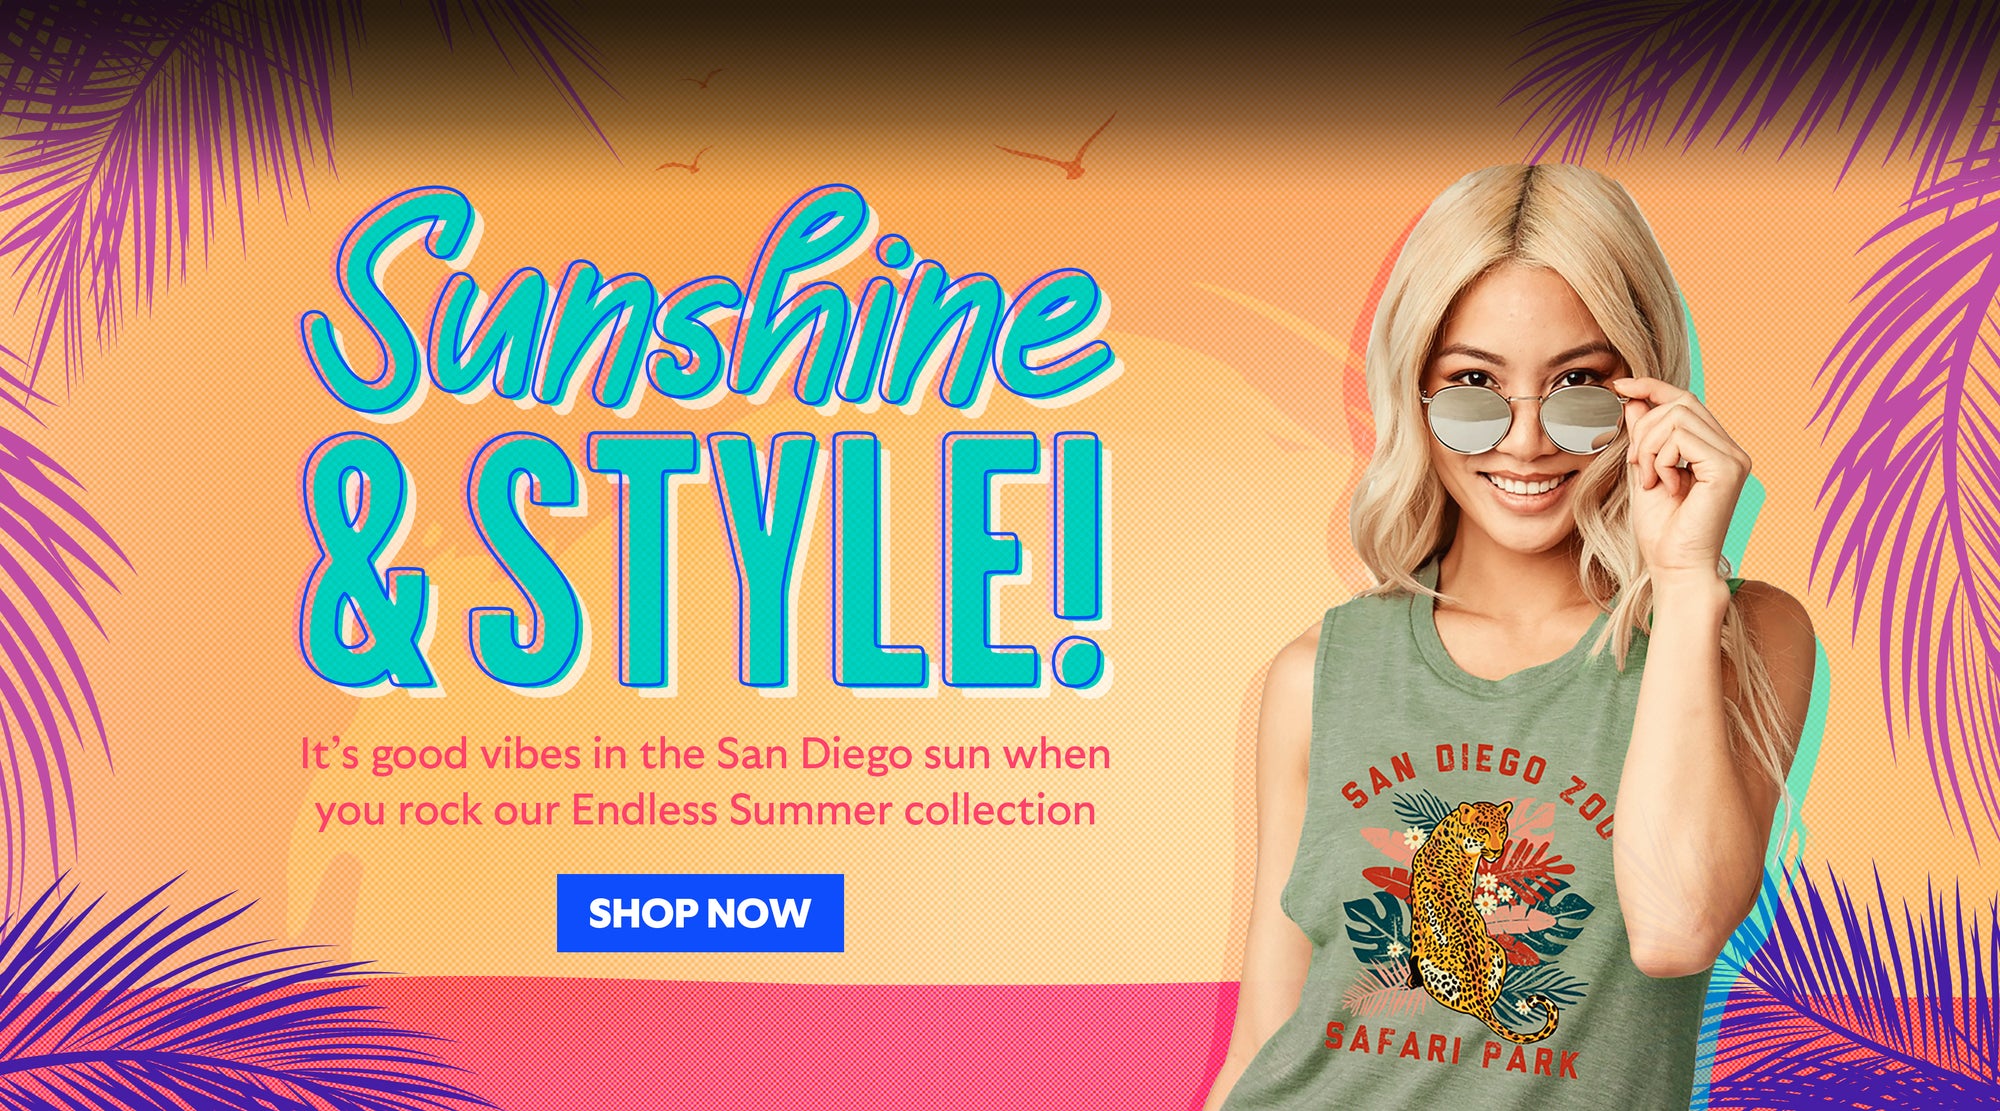 Enjoy Sunshine and Style with our Endless Summer Collection